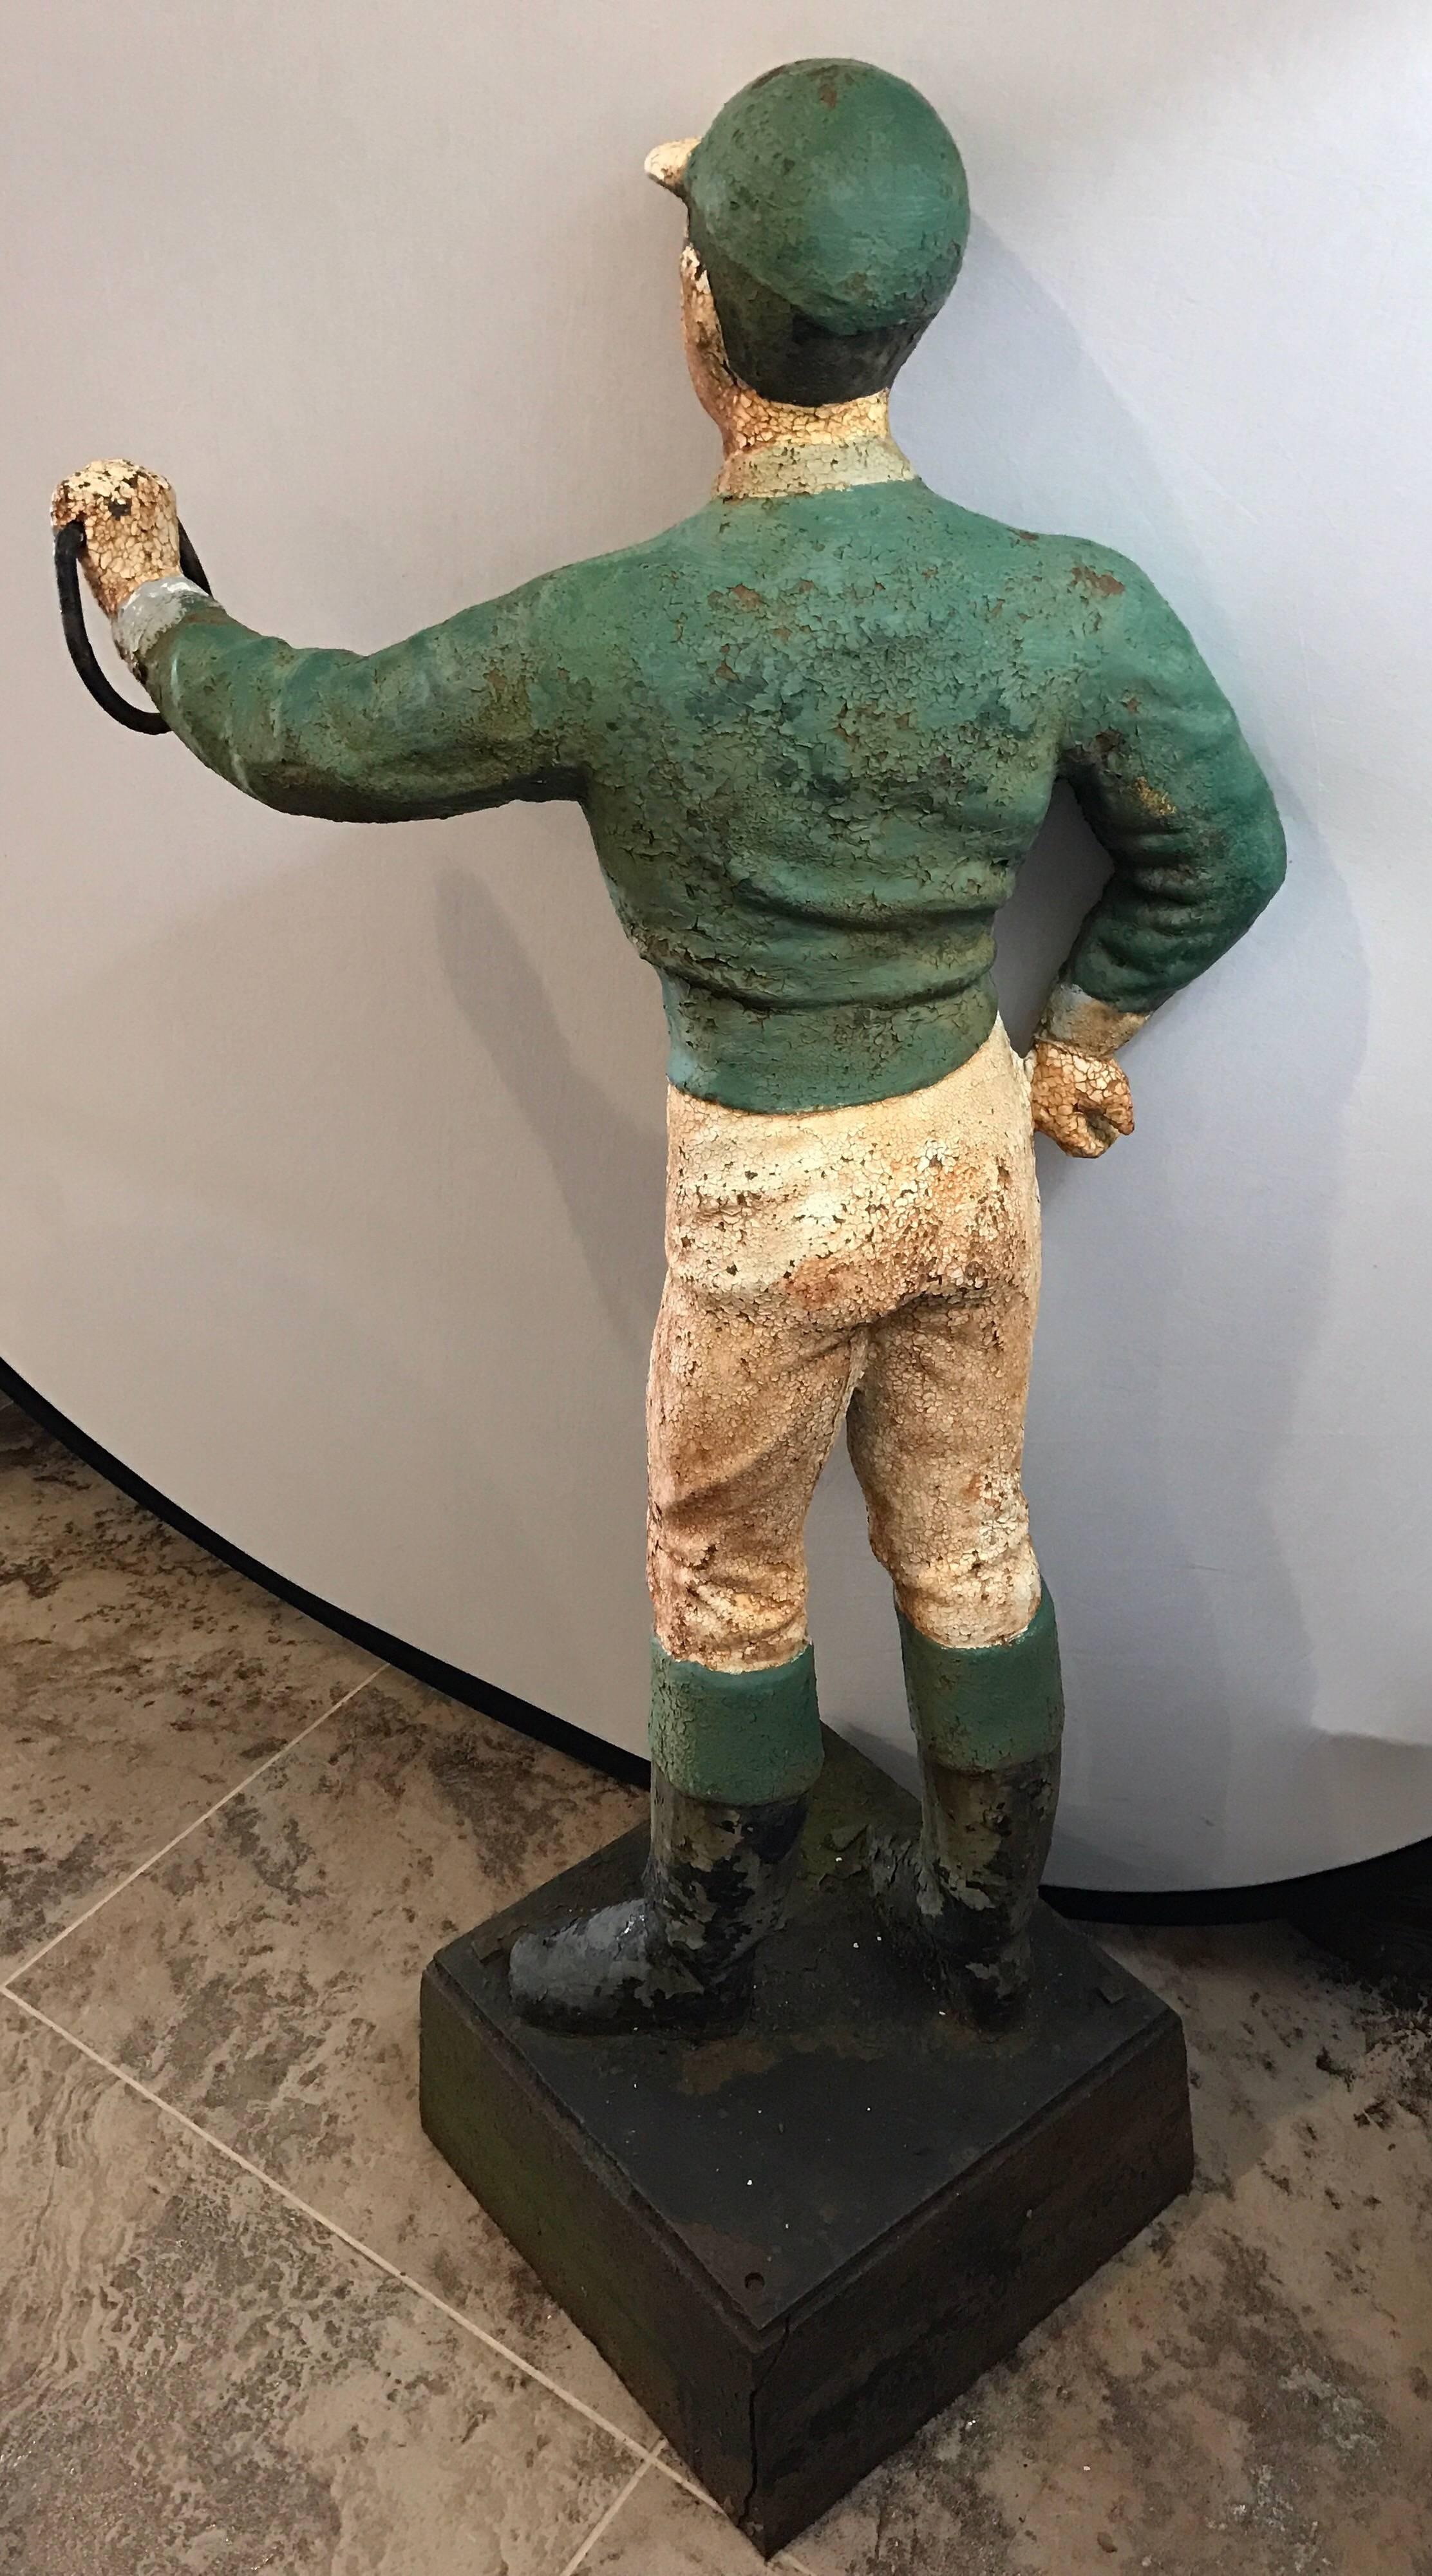 Very heavy 4 foot cast iron painted lawn jockey or hitching post.